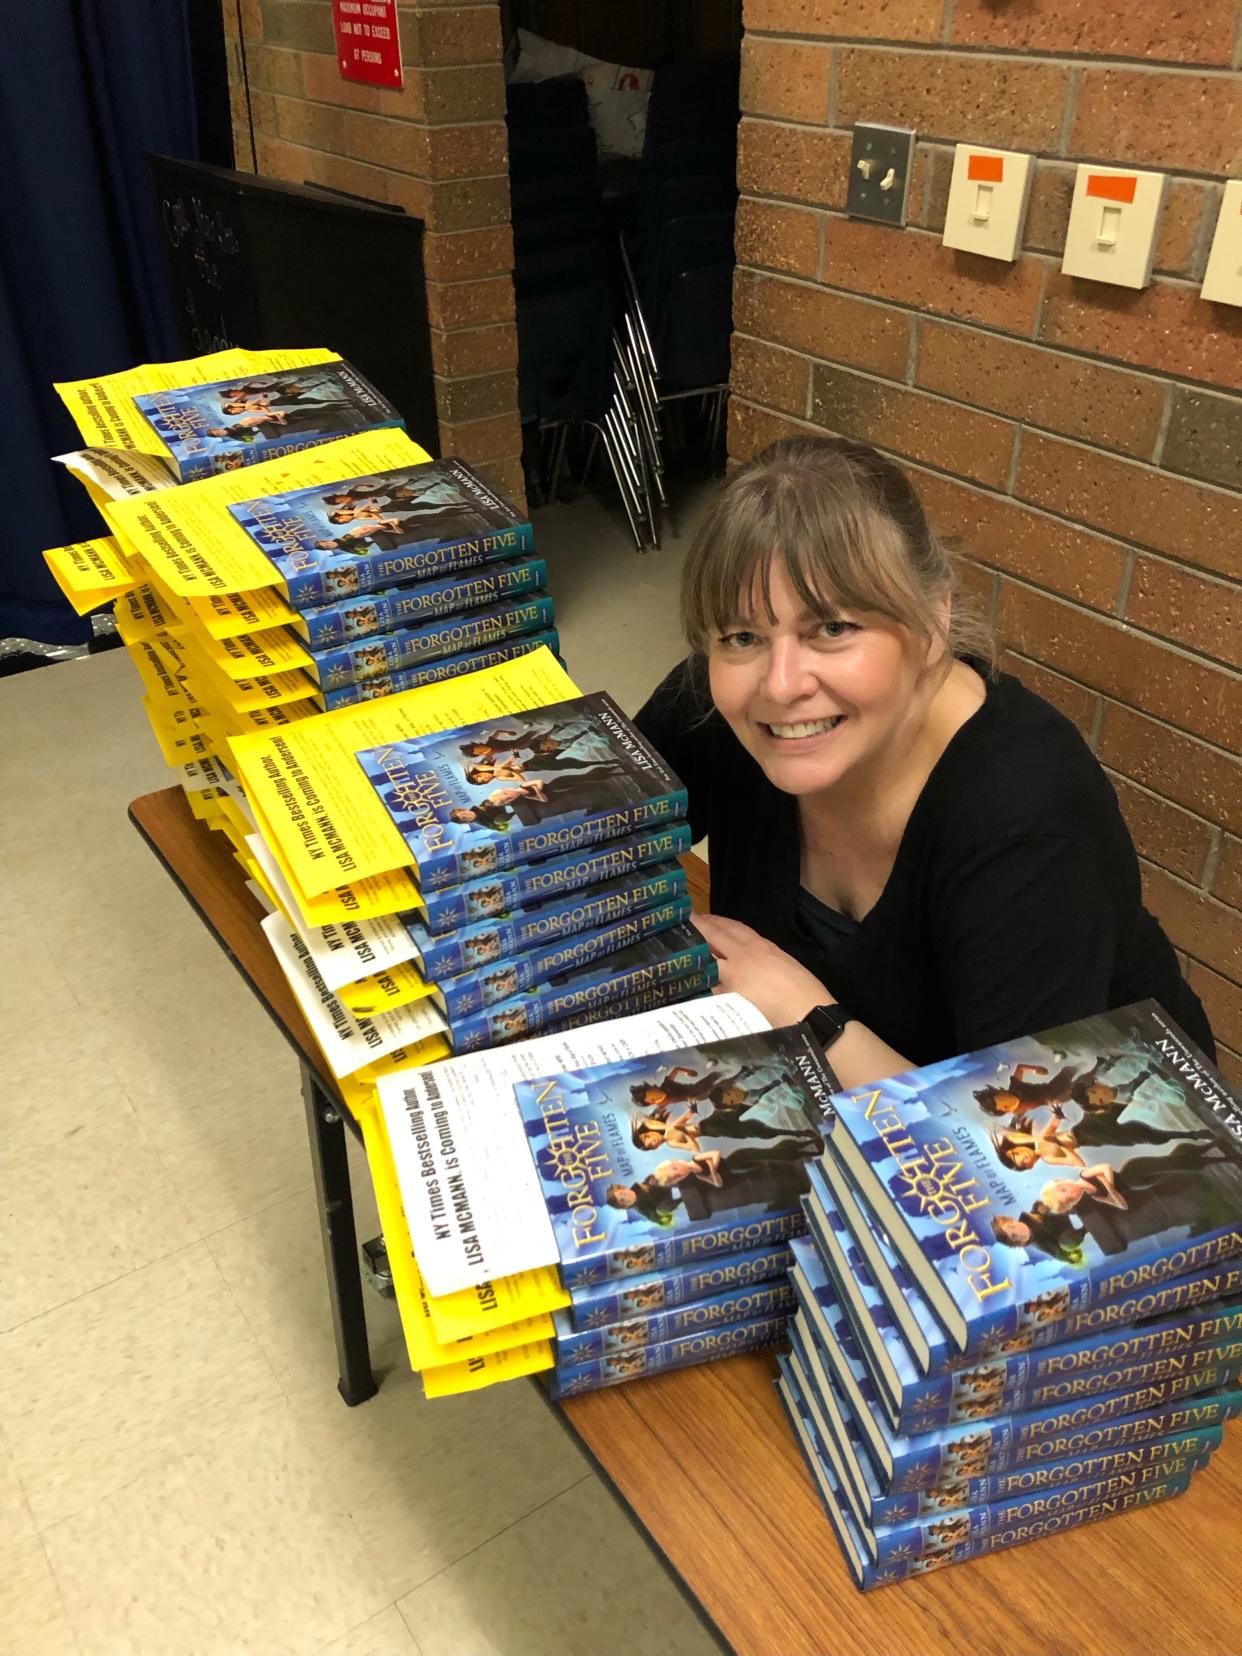 Lisa McMann poses with copies of "Map of Flames," the first book in "The Forgotten Five" series.